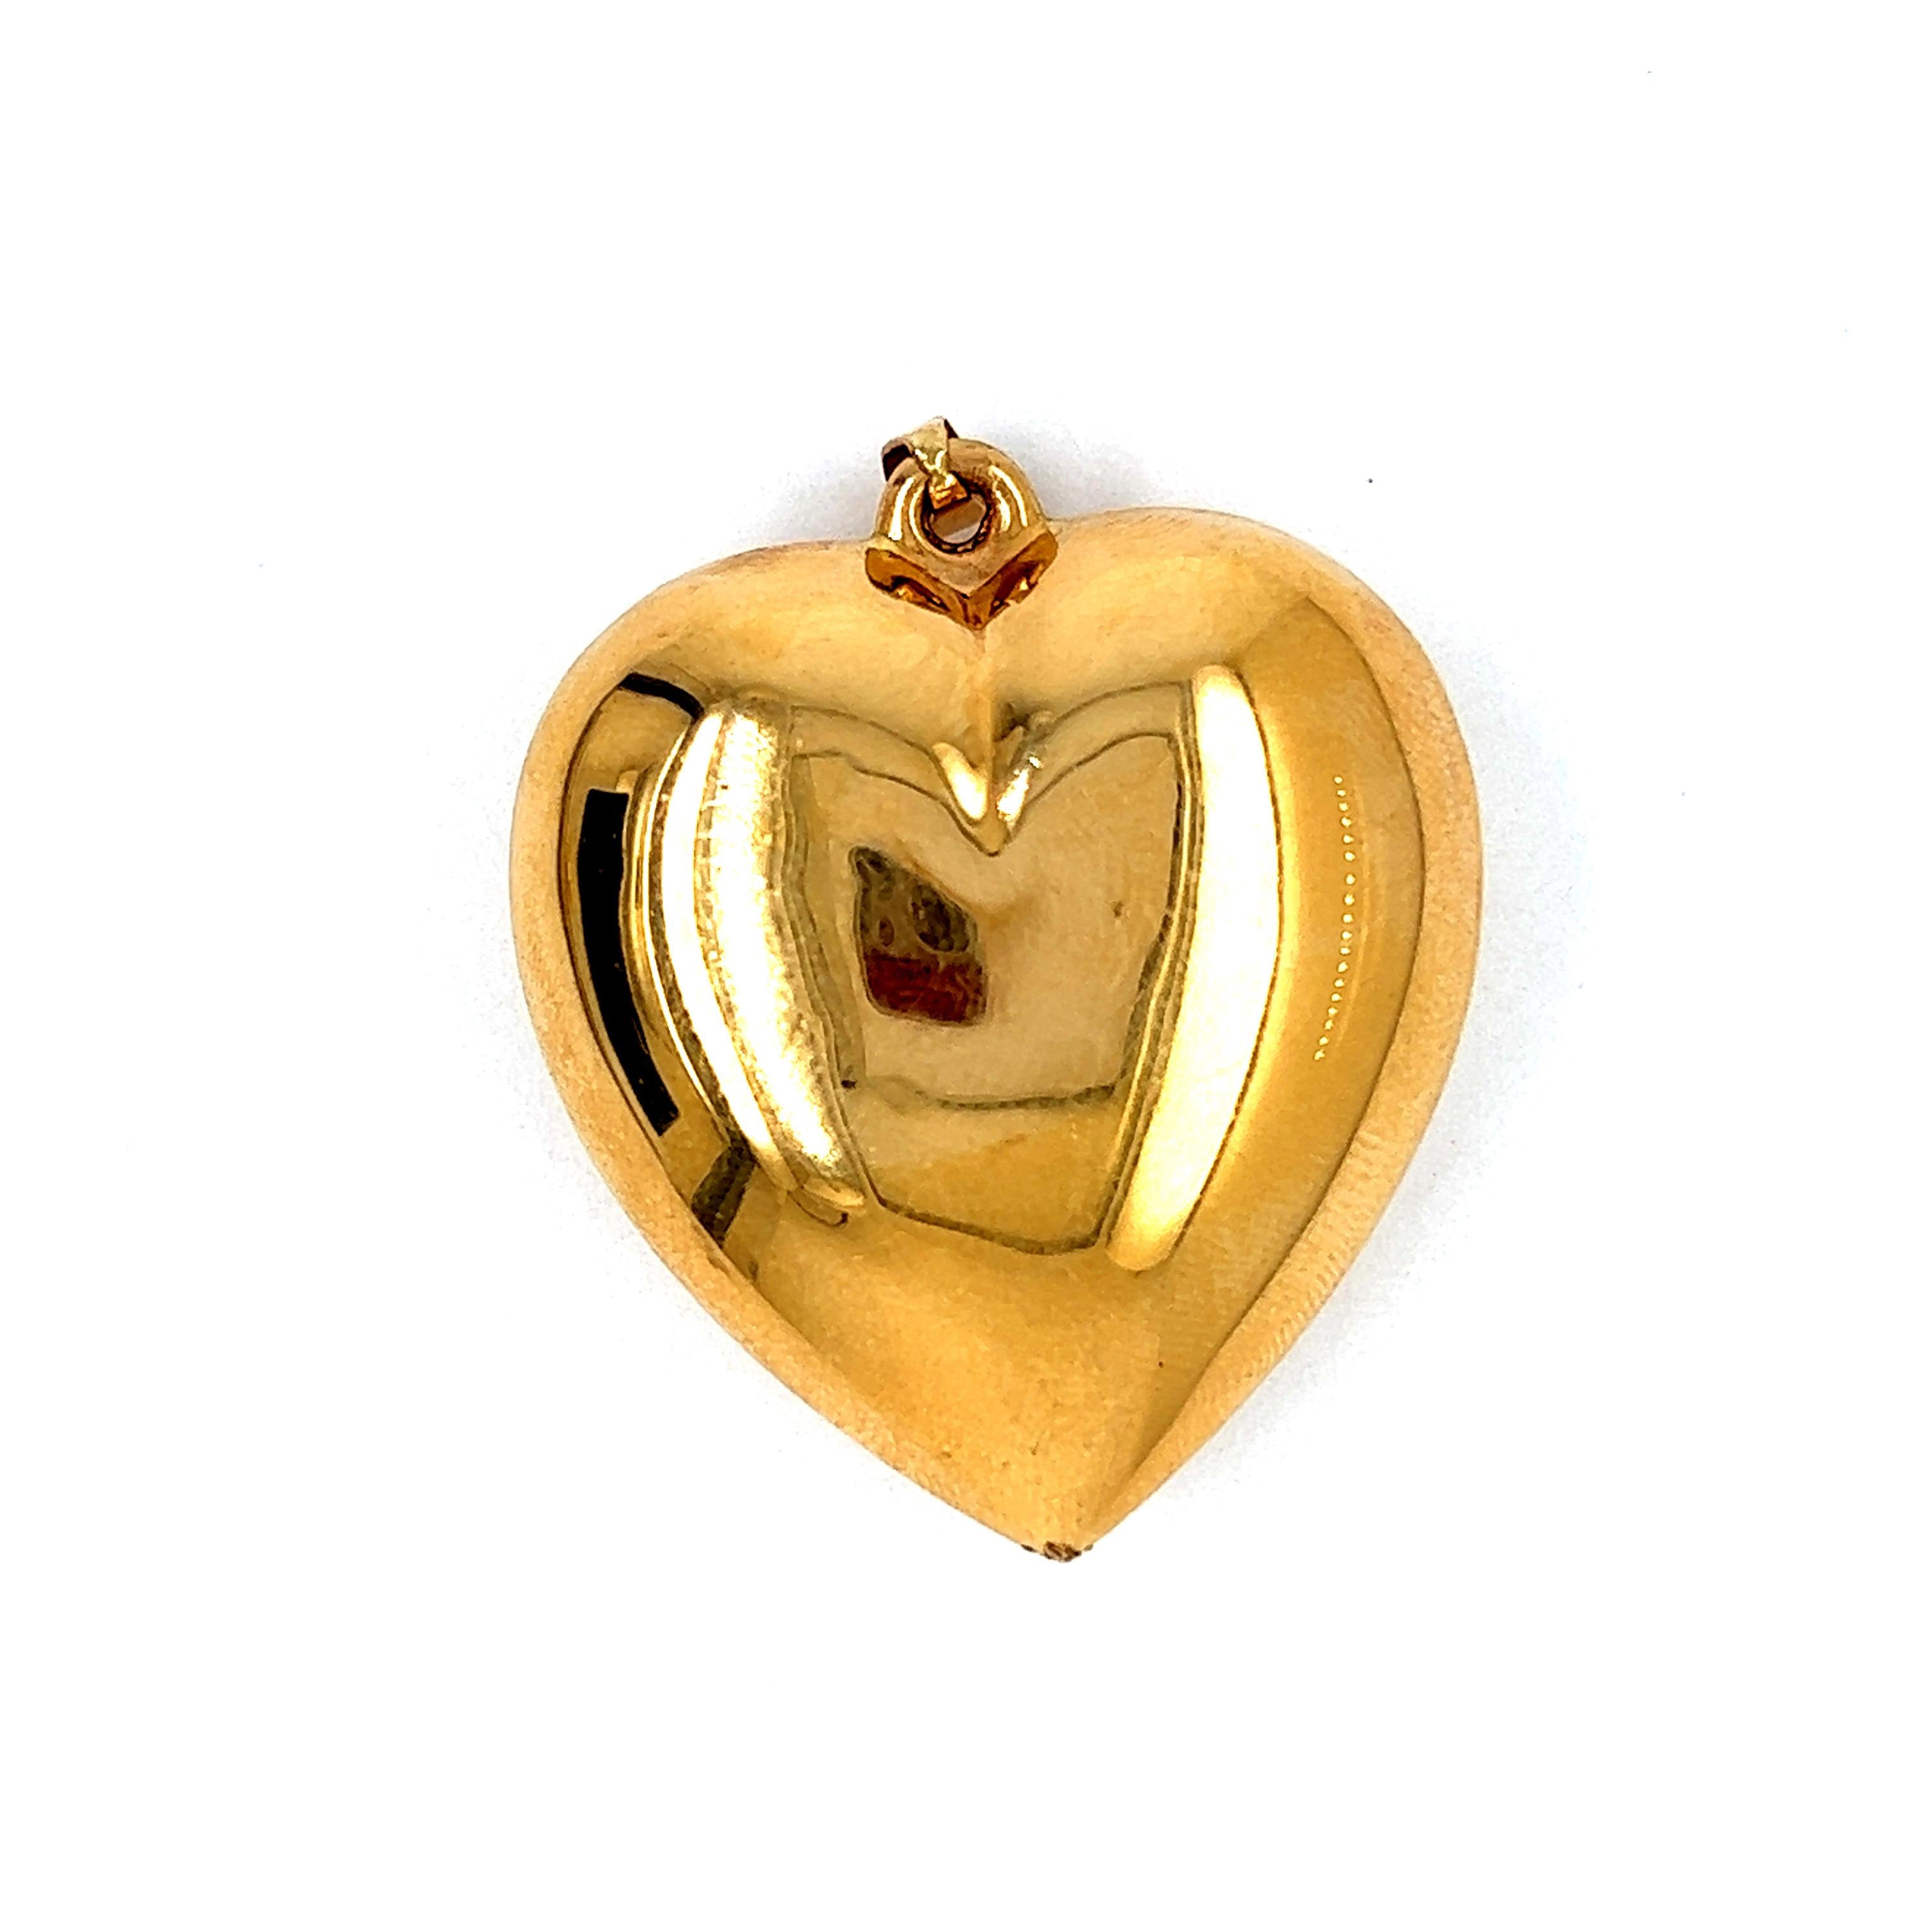 Vintage Large Puffy Heart 14k Gold Charm